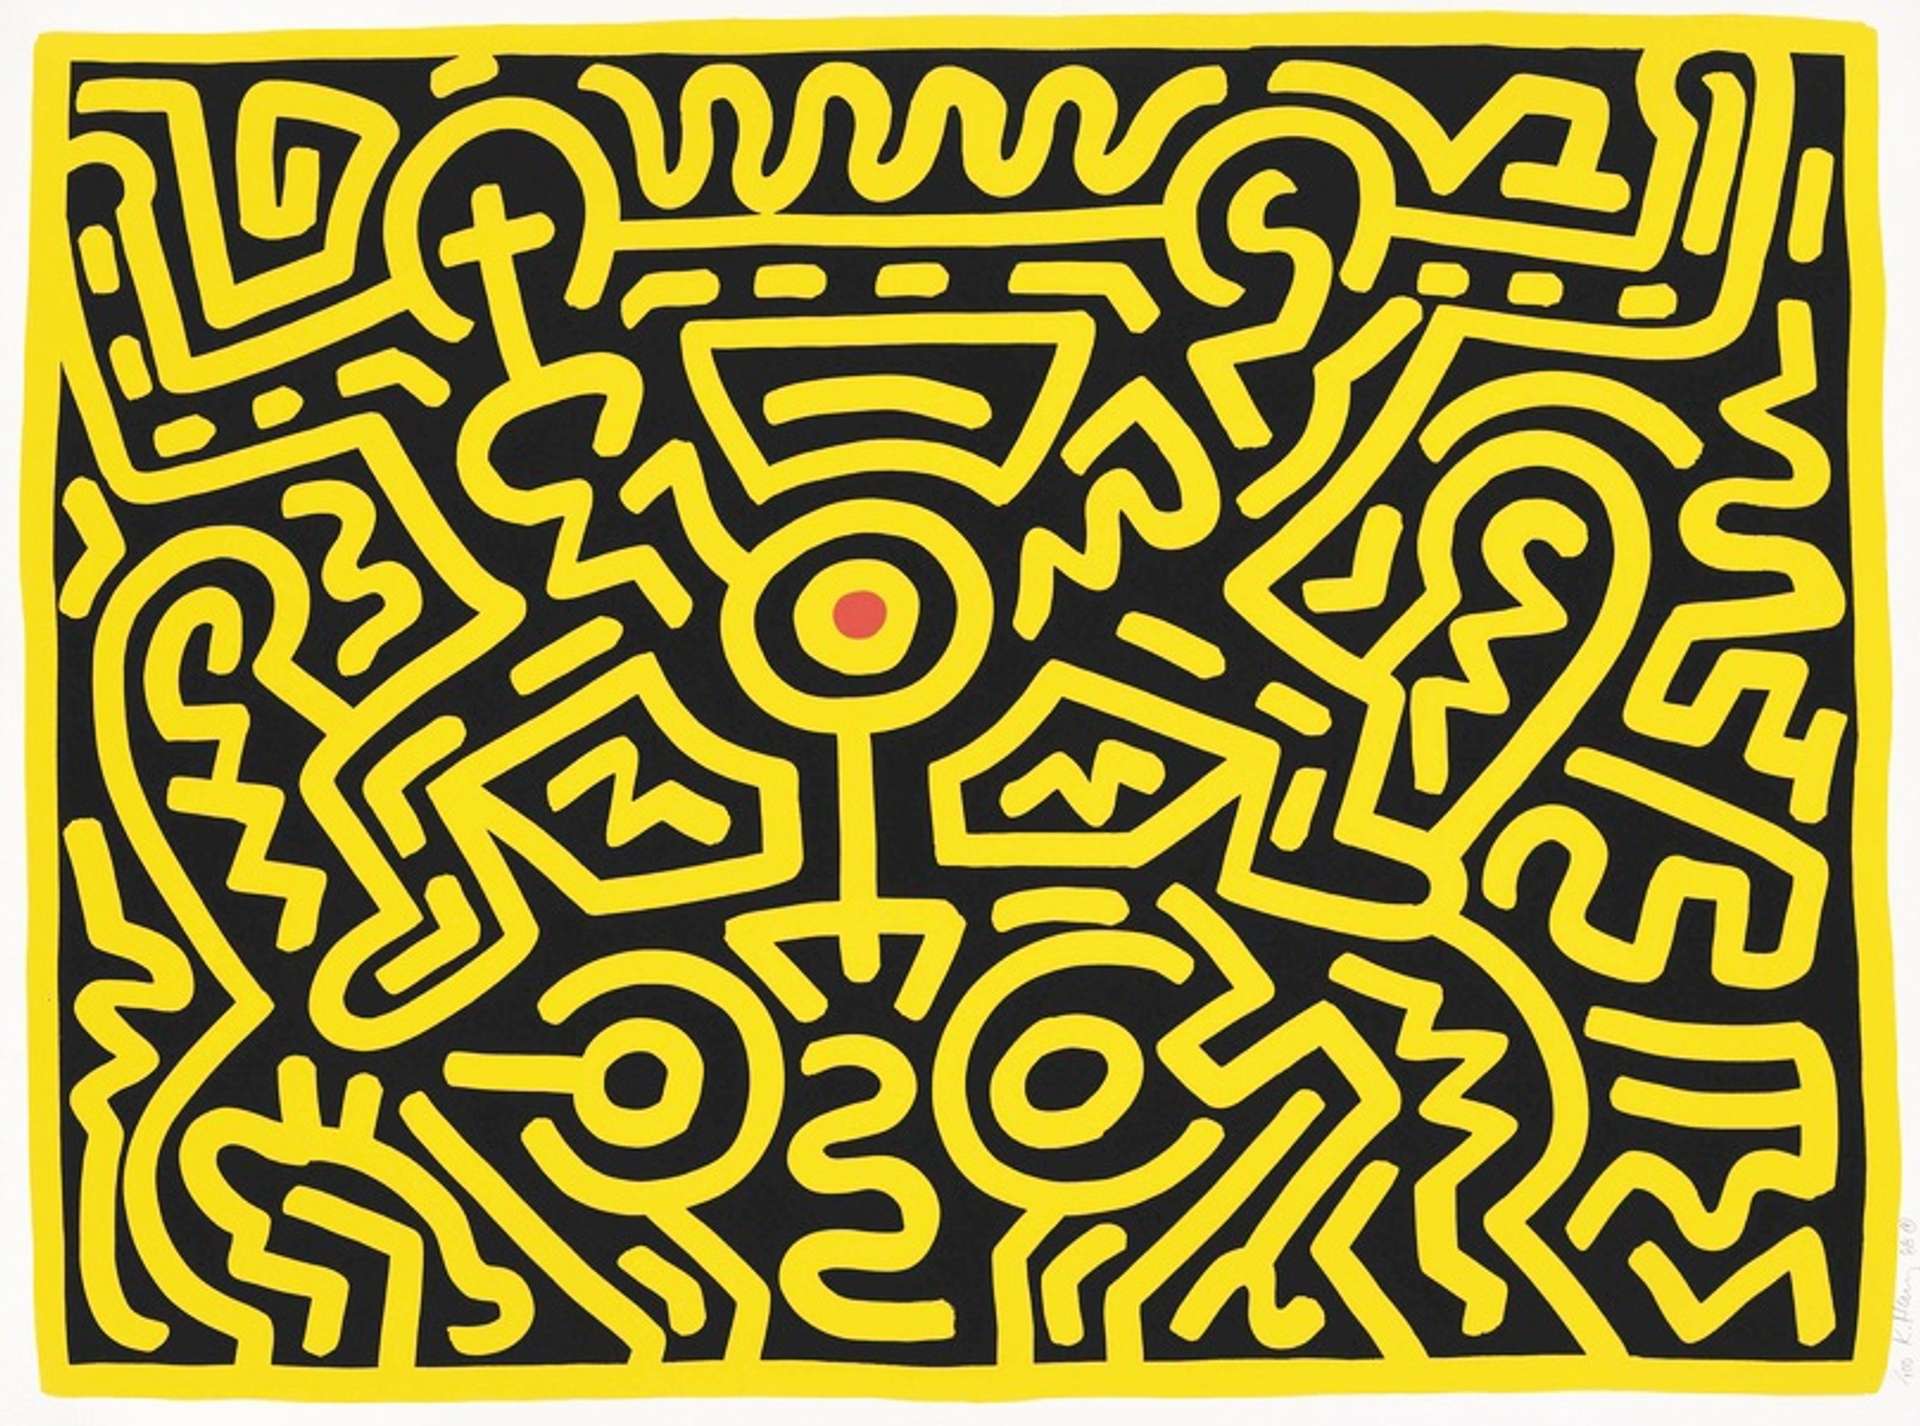 Growing 3 by Keith Haring